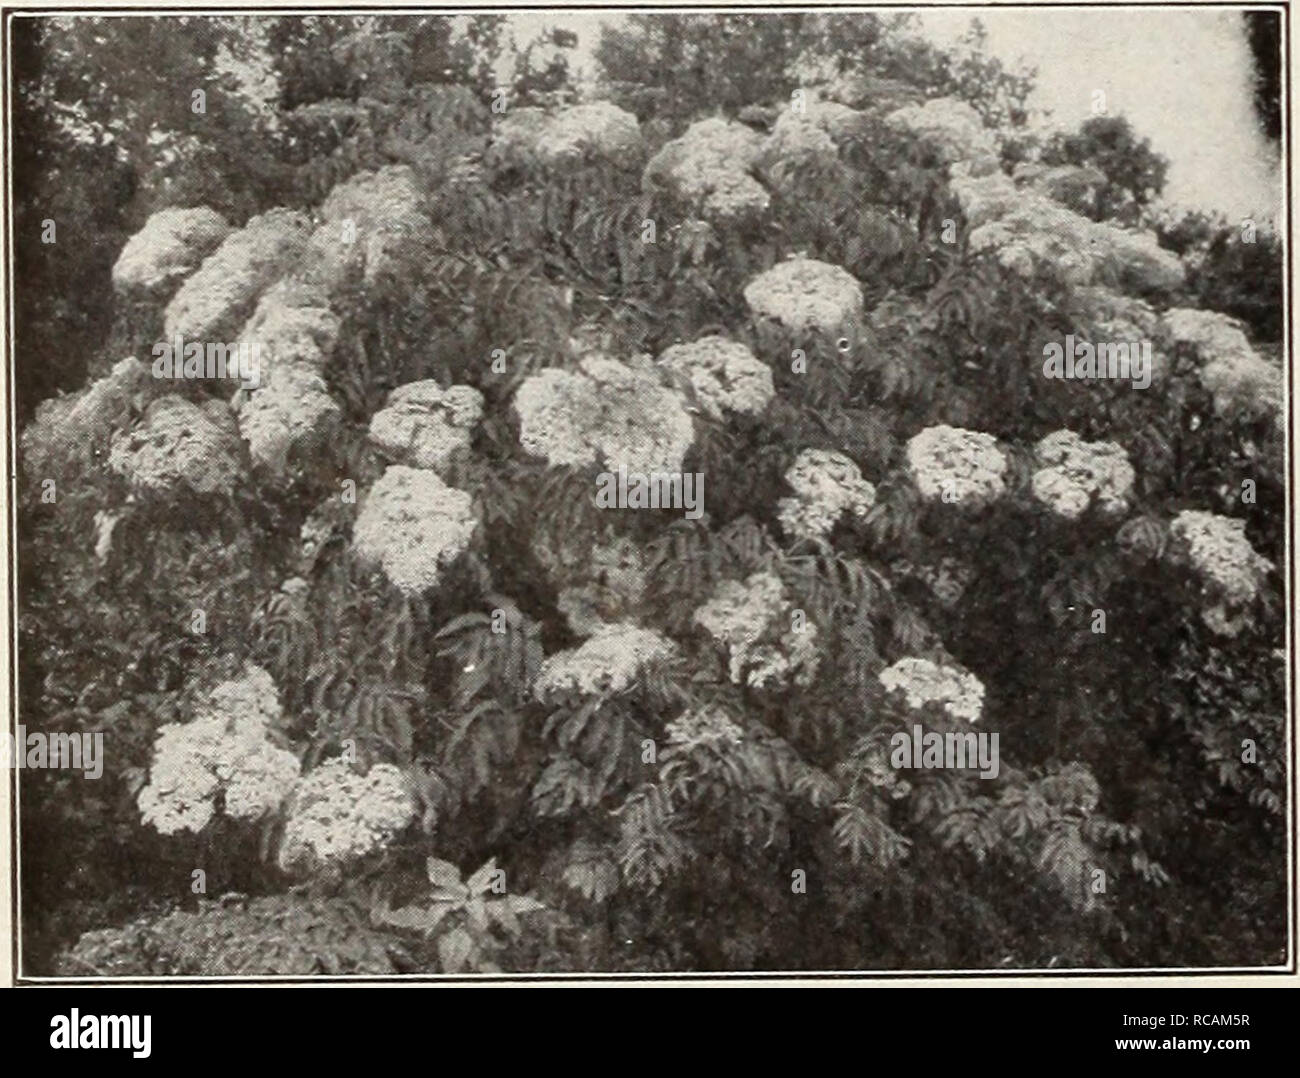 . Ellwanger &amp; Barry Mt Hope Nurseries 1916. Nurseries (Horticulture) Catalogs; Roses Seeds Catalogs; Strawberries Catalogs; Bulbs (Plants) Catalogs; Fruit Catalogs; Flowers Catalogs. RHUS—SUMACH-Confmued R. copallina. Dwarf Sujiach. Shining Sumach. D. Beautiful shining green foliage changing to rich crimson in autumn. Greenish-yellow flow- ers in August. 18 to 24 in., 50c each. R. Cotinus. Purple Fringe, or Sjioke Tree. C. From the South of Europe. A much admired shrub for its curious fringe, or hair-like flowers, that cover the whole surface of the plant in mid- summer. It grows 10 to 12  Stock Photo